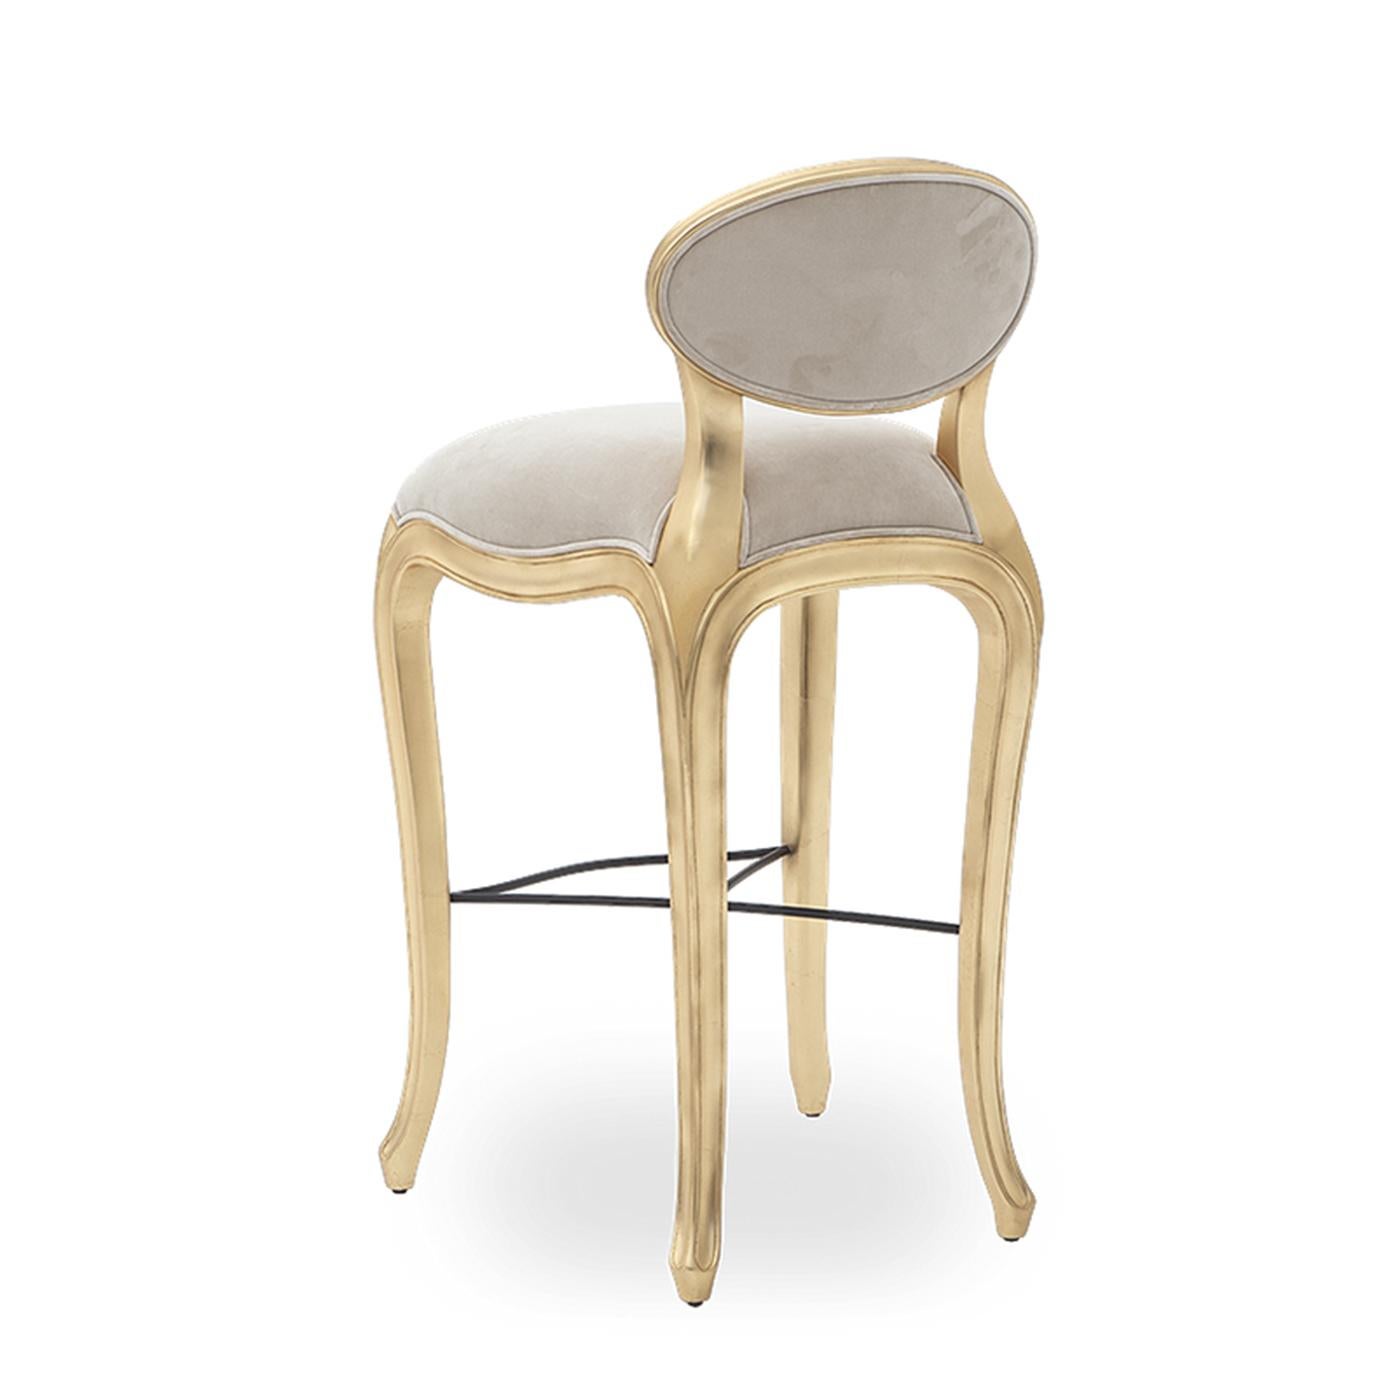 Barstool Flore with structure in handcrafted solid
mahogany wood in gold leaf finish, with cabriole
feet, with footrest. Upholstered seat and back
covered with high quality fabric Alcantara soft grey.
Seat dimensions: L 51 x D 44, seat height 80